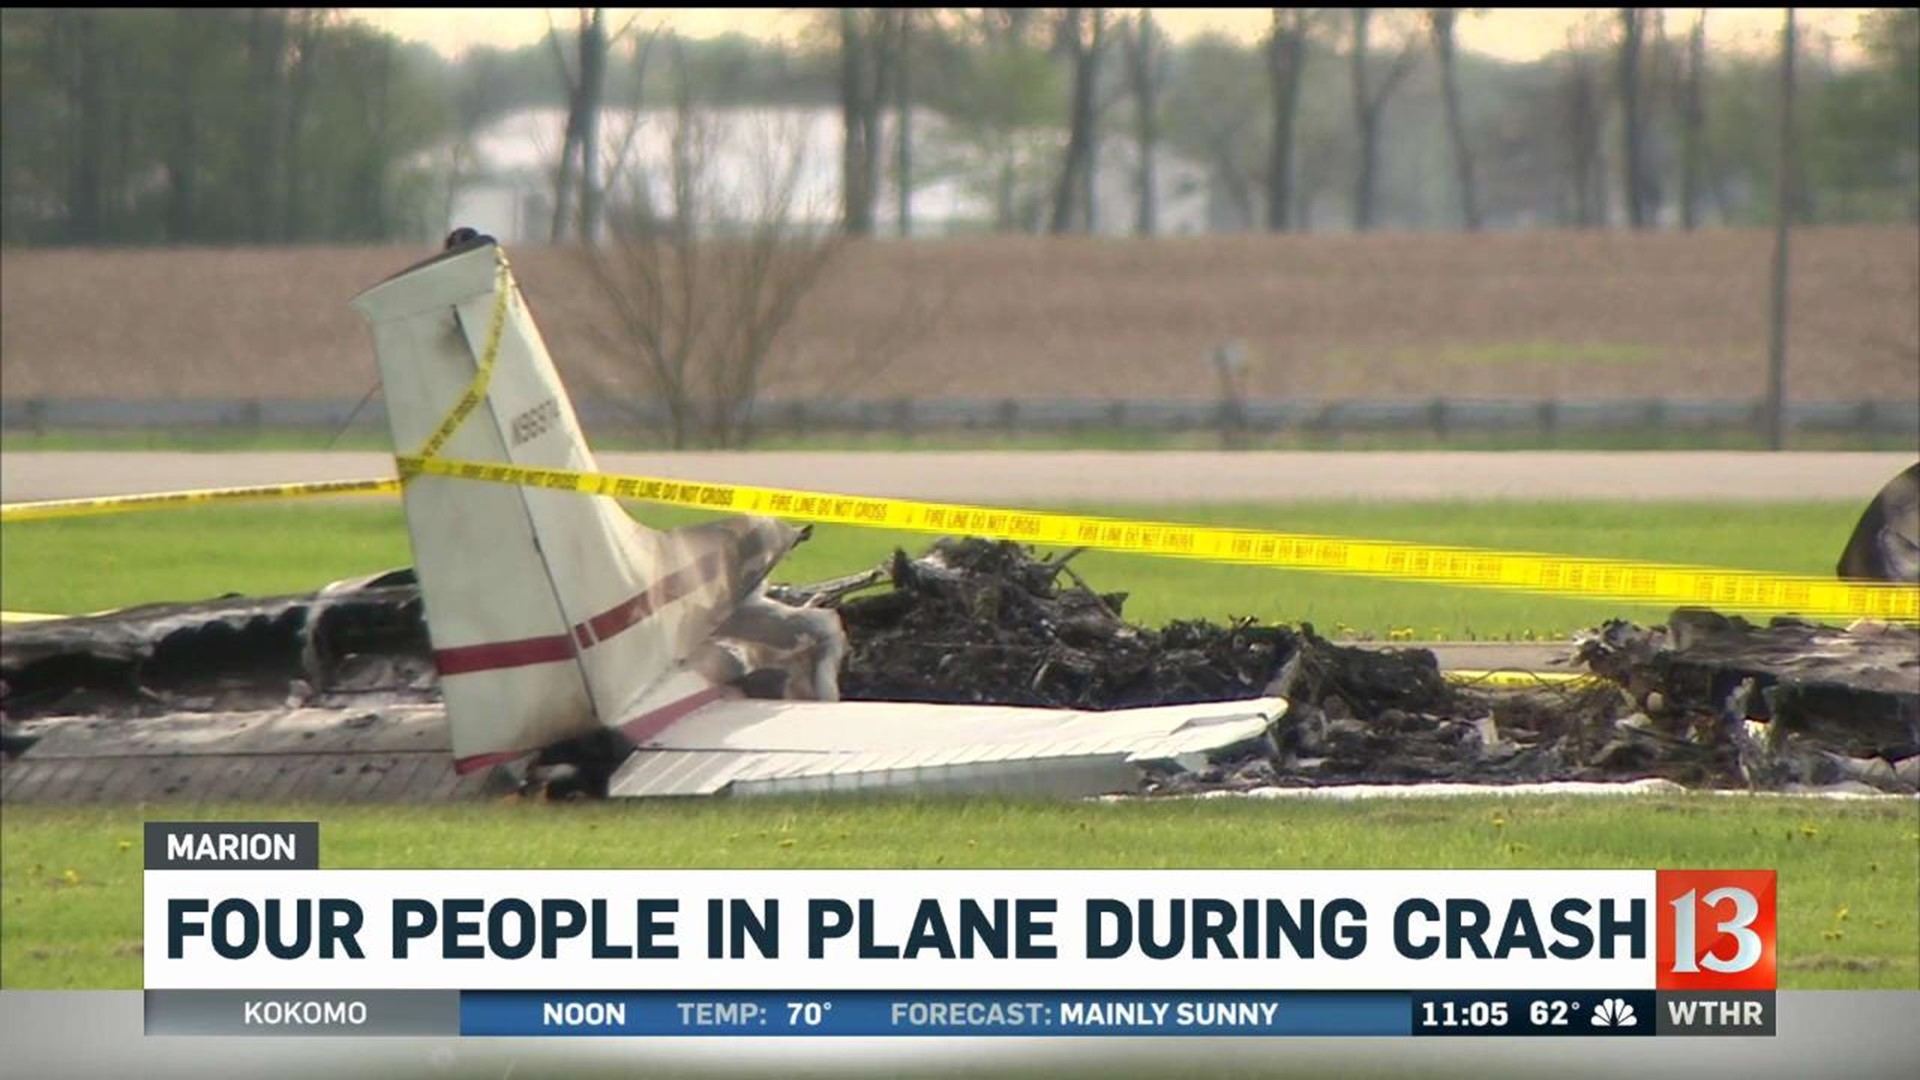 Two Plane Crashes in One Day